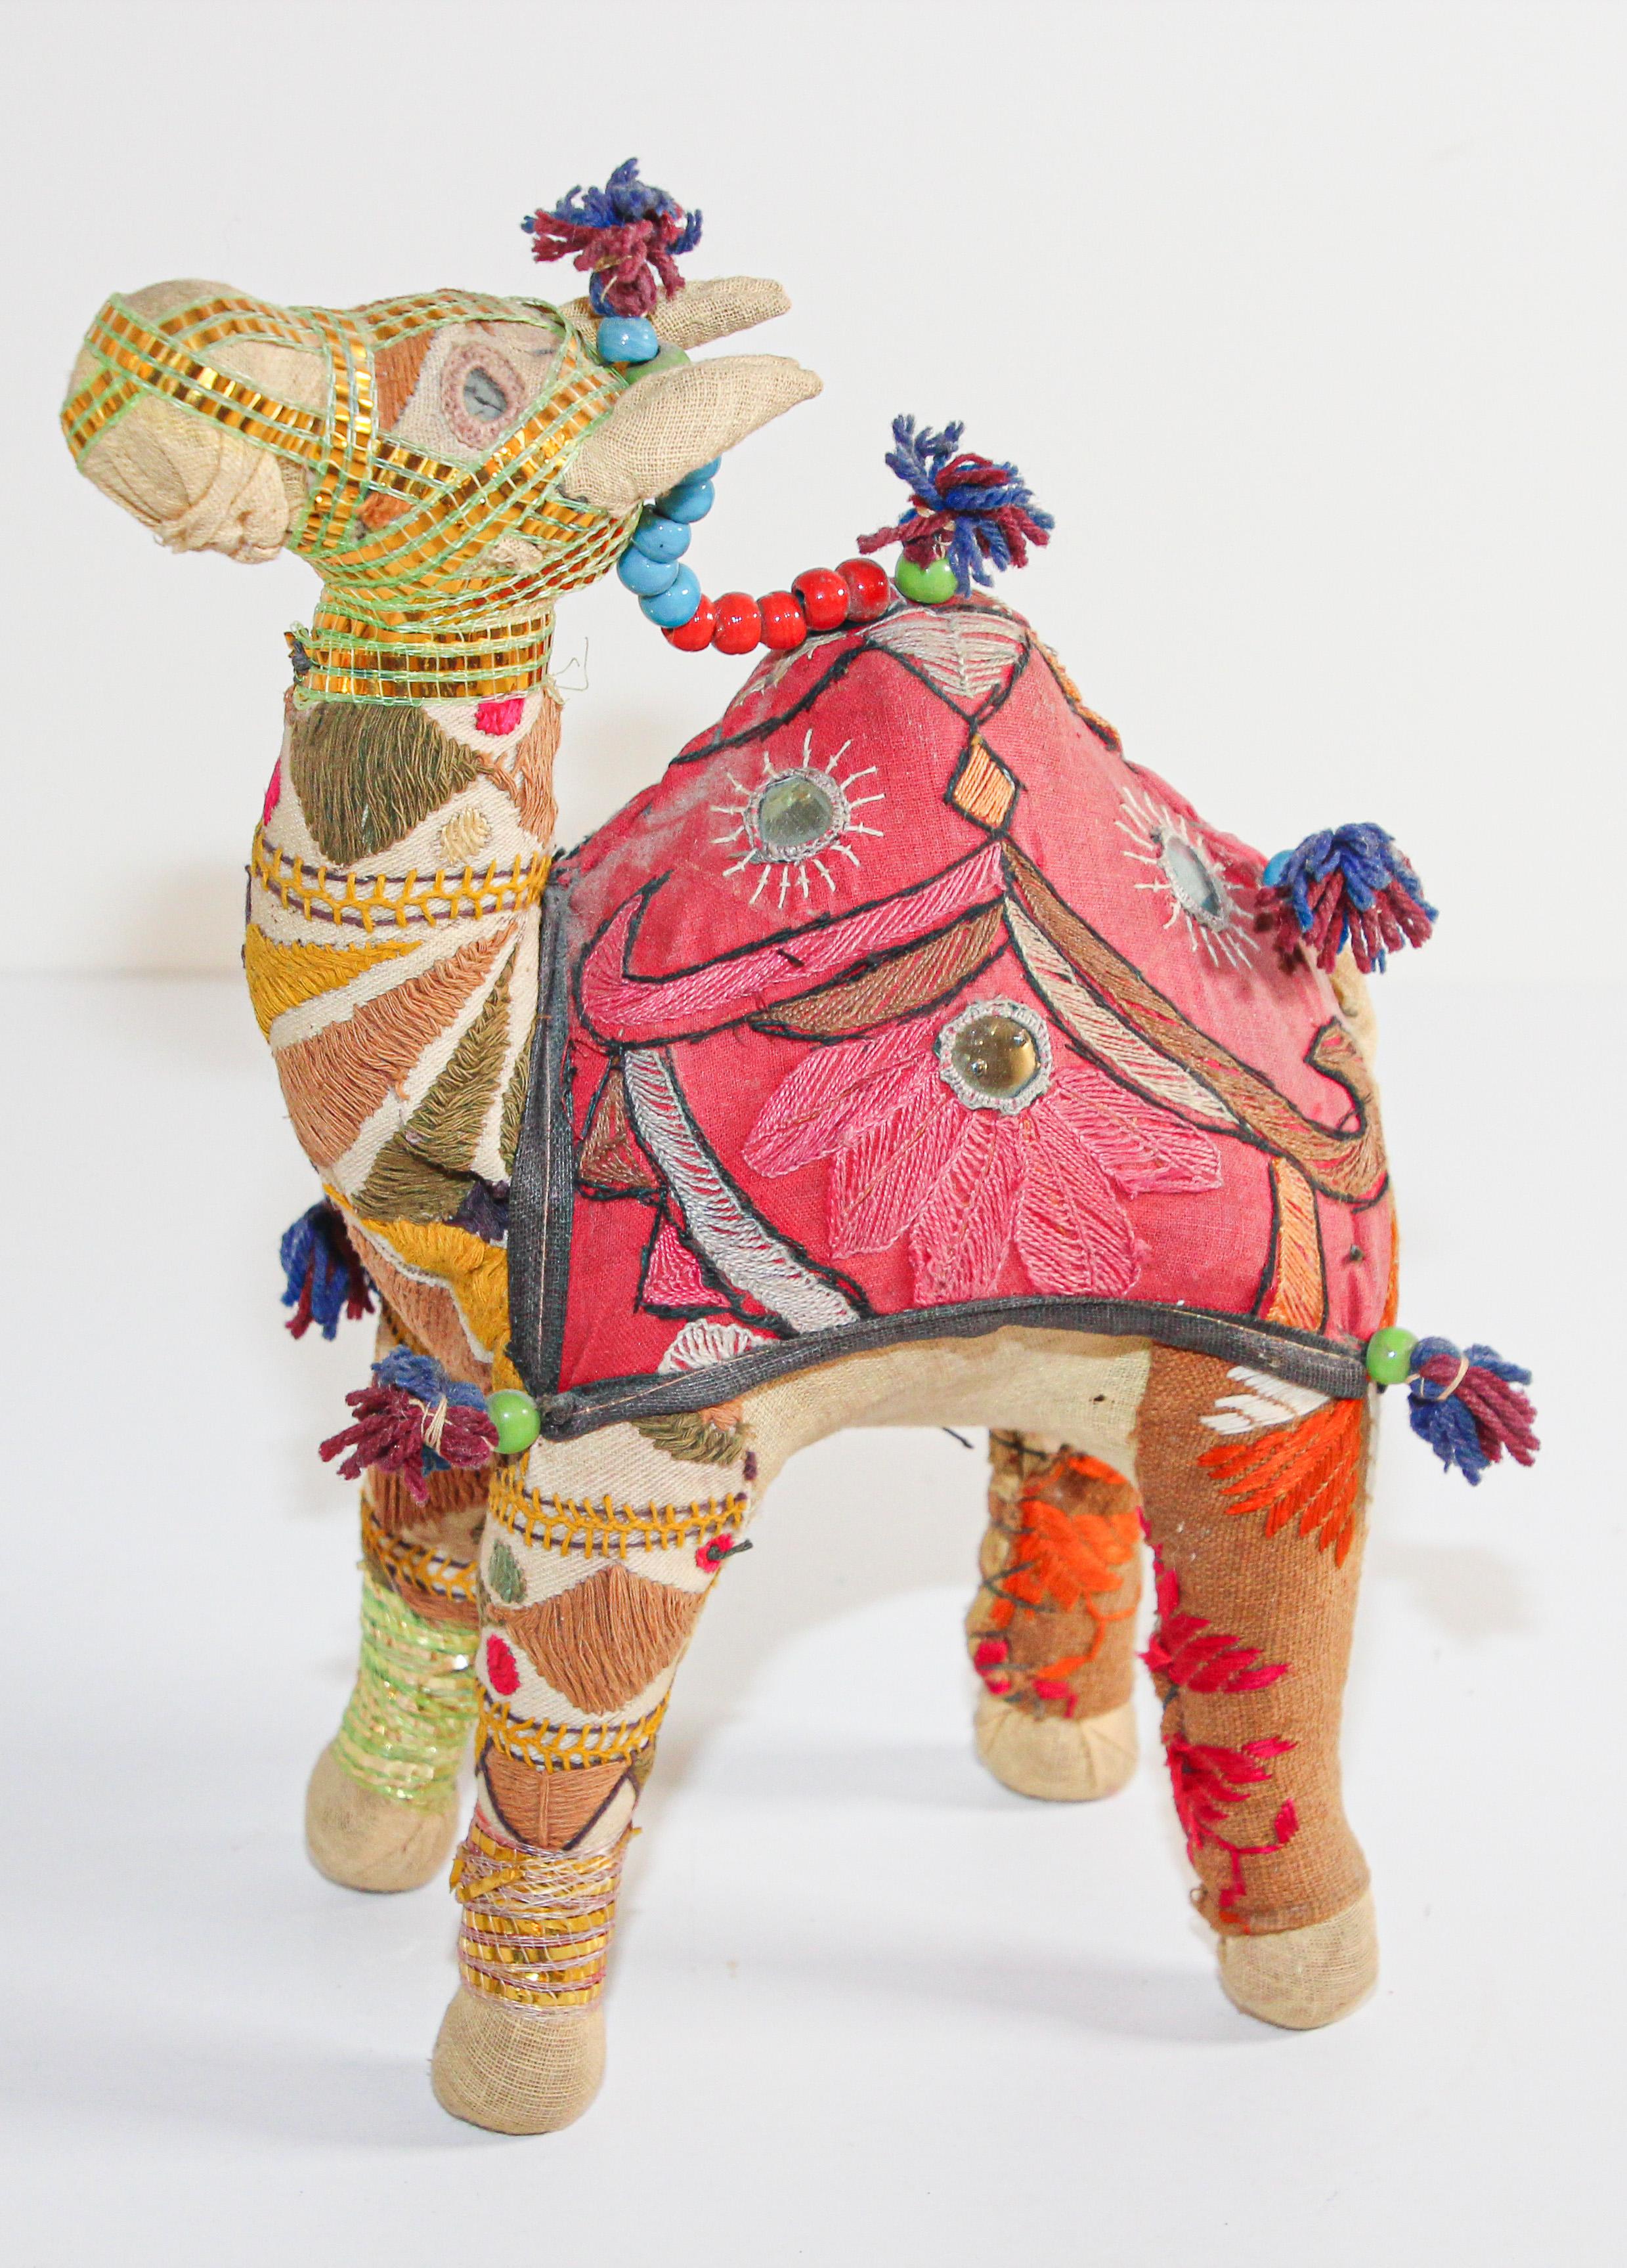 Handmade in Rajasthan, India, colorful fabric camel toy.
Vintage small camel stuffed cotton embroidered and decorated with small mirrors, great collector piece.
Anglo Raj, small stuffed camel wearing the ceremonial folk attire made from